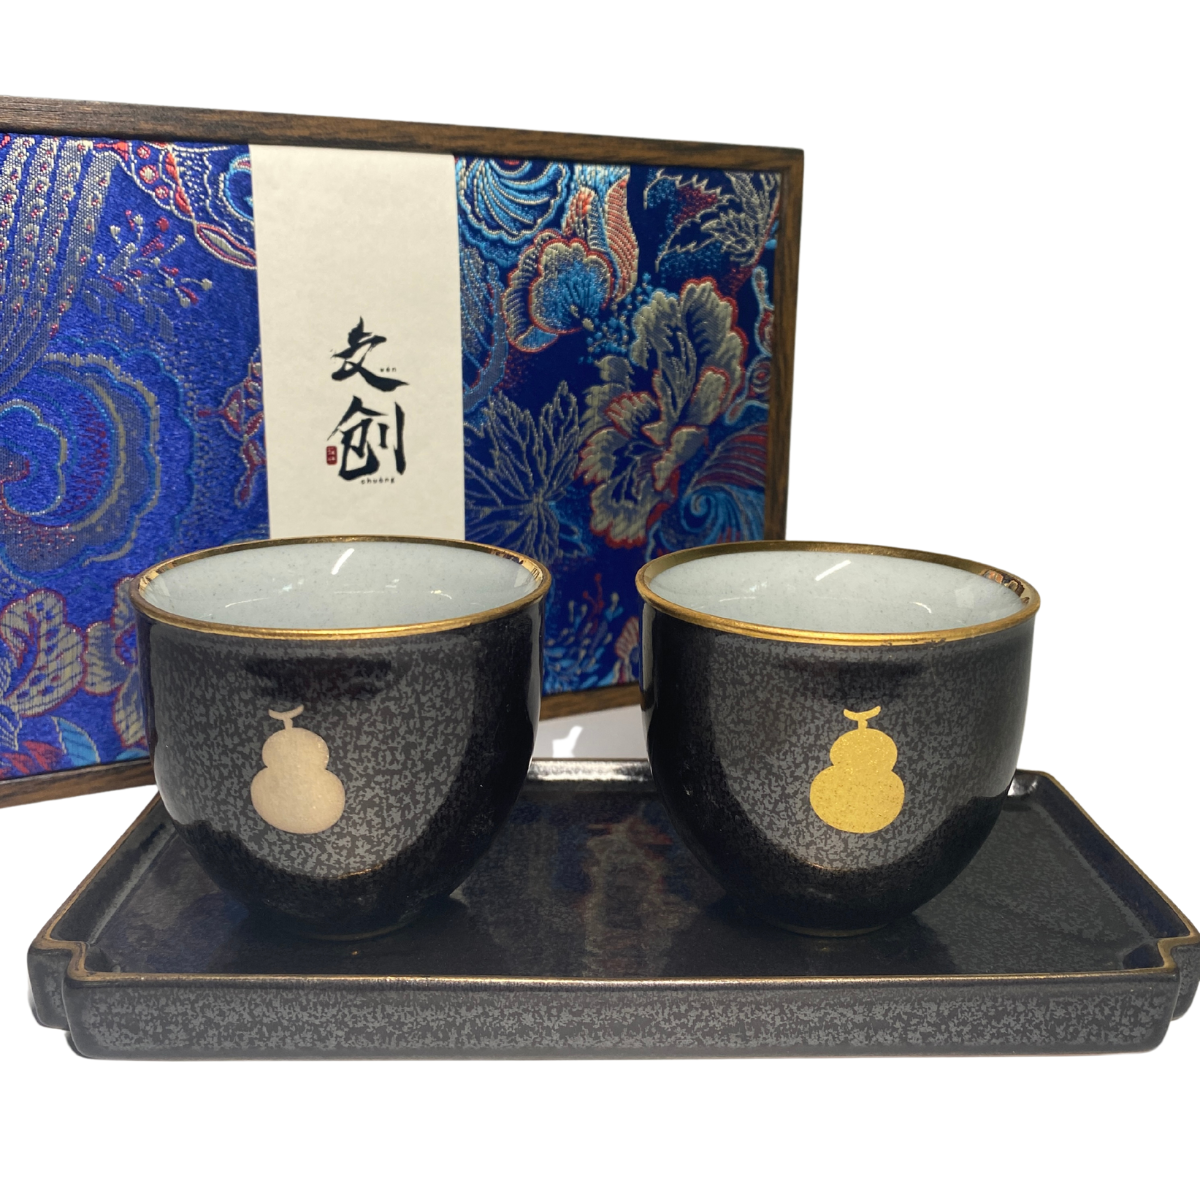 JDZ 2 Gourd Tea Cups with a plate